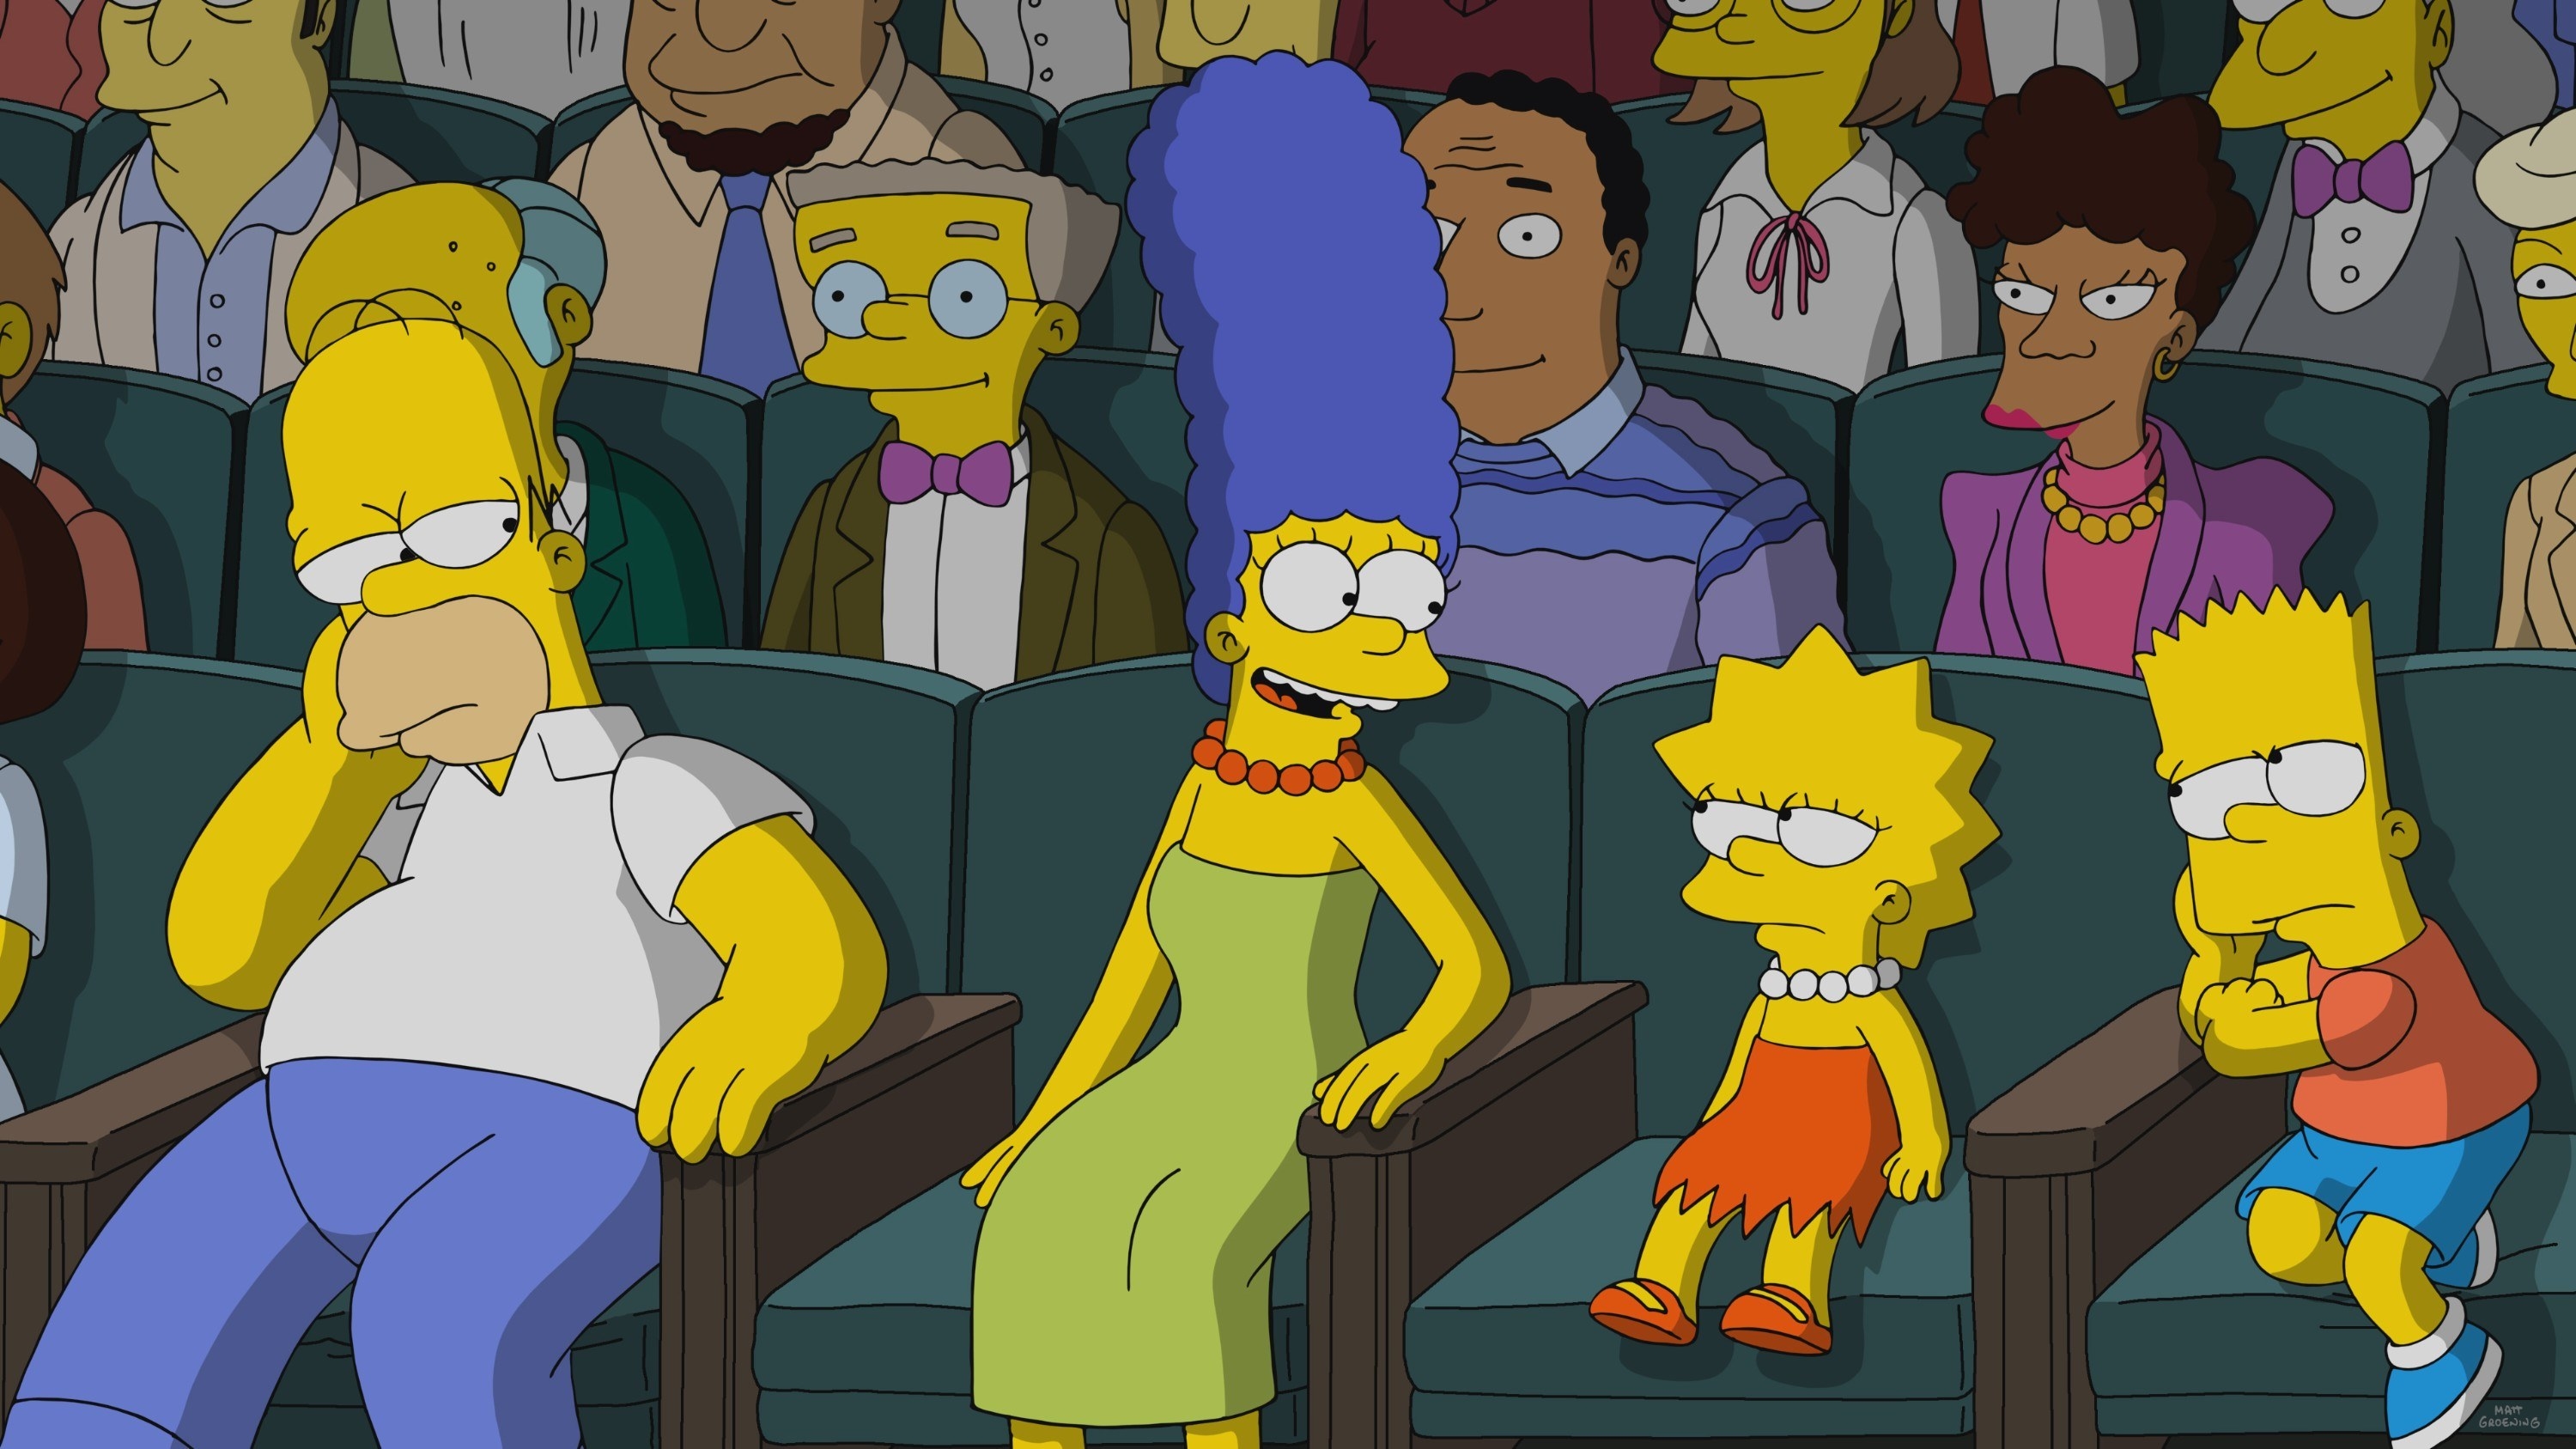 The Simpsons sitting in a movie theater